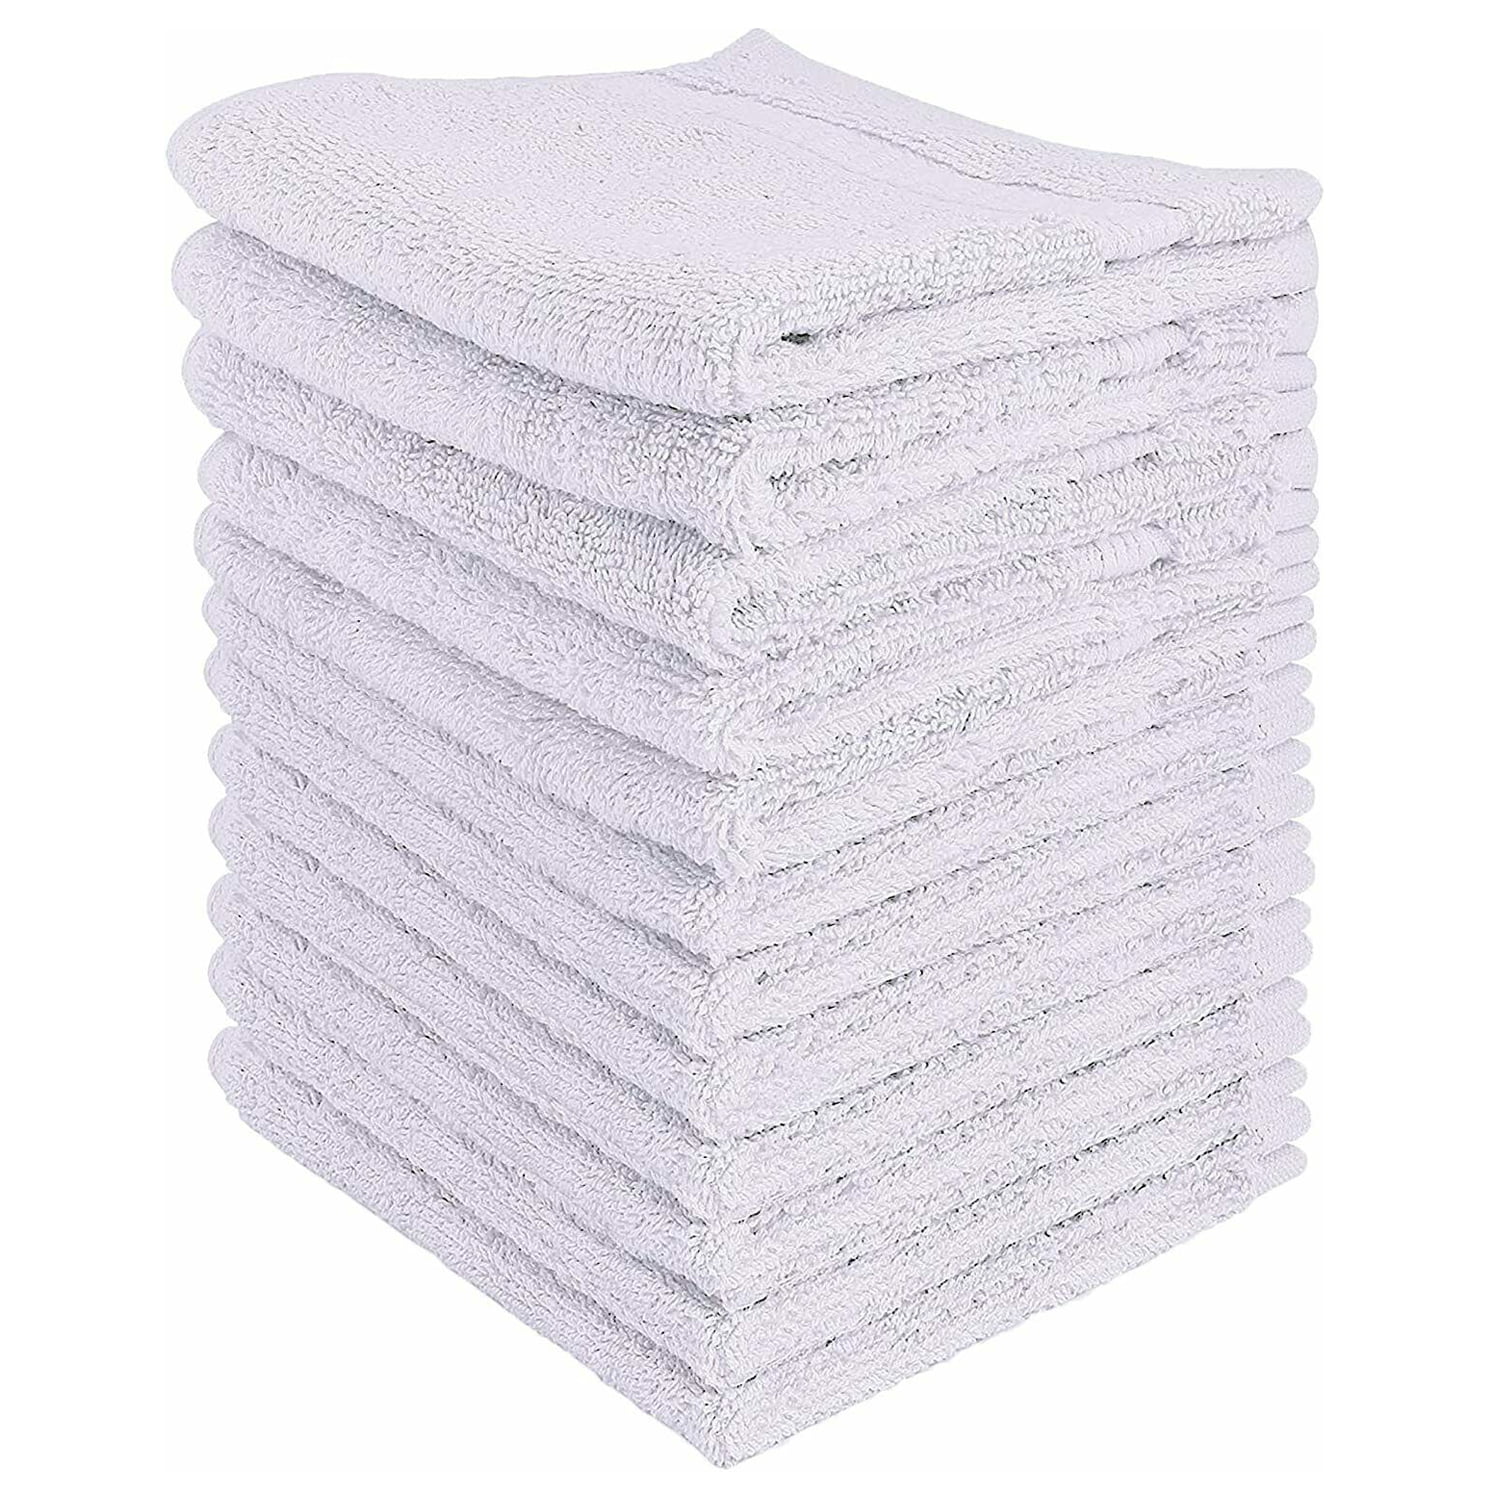 Preferred Comfort White Wash Cloths 2 PLY 12x12, 12 Pack, 100% Cotton, New